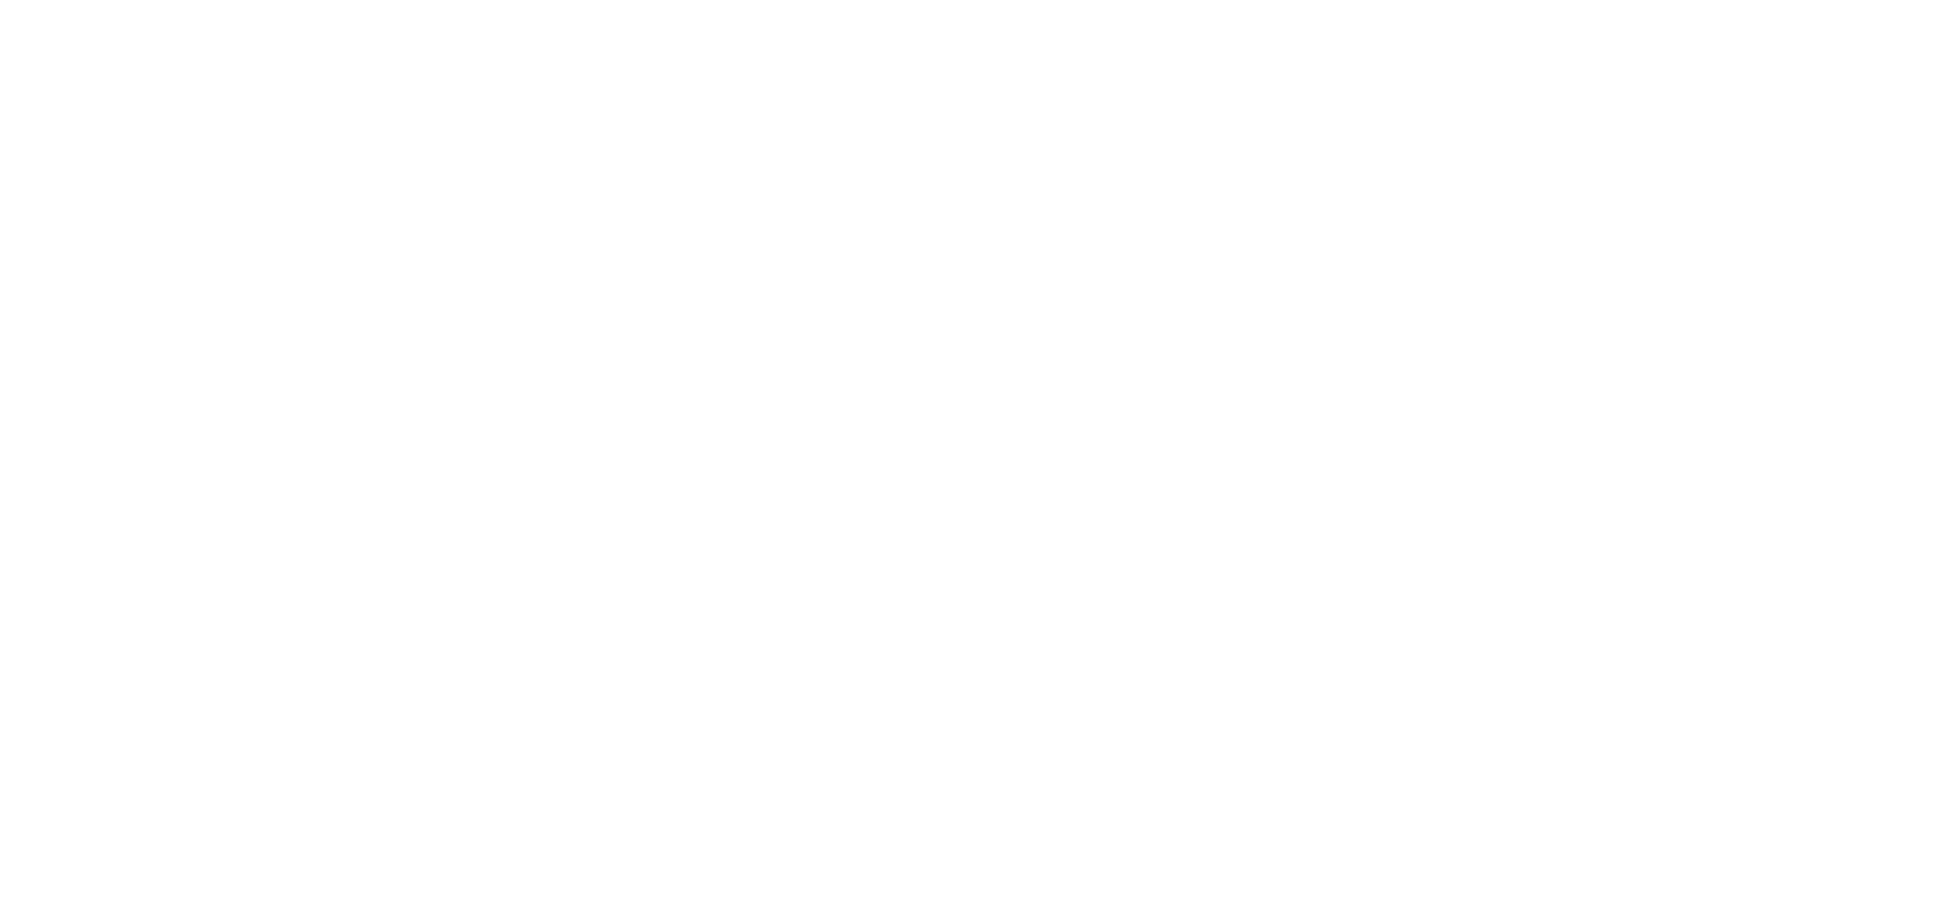 Foundational_Technologies_ICON-TYPE_Final-Black-BW-04 all white with rule.png